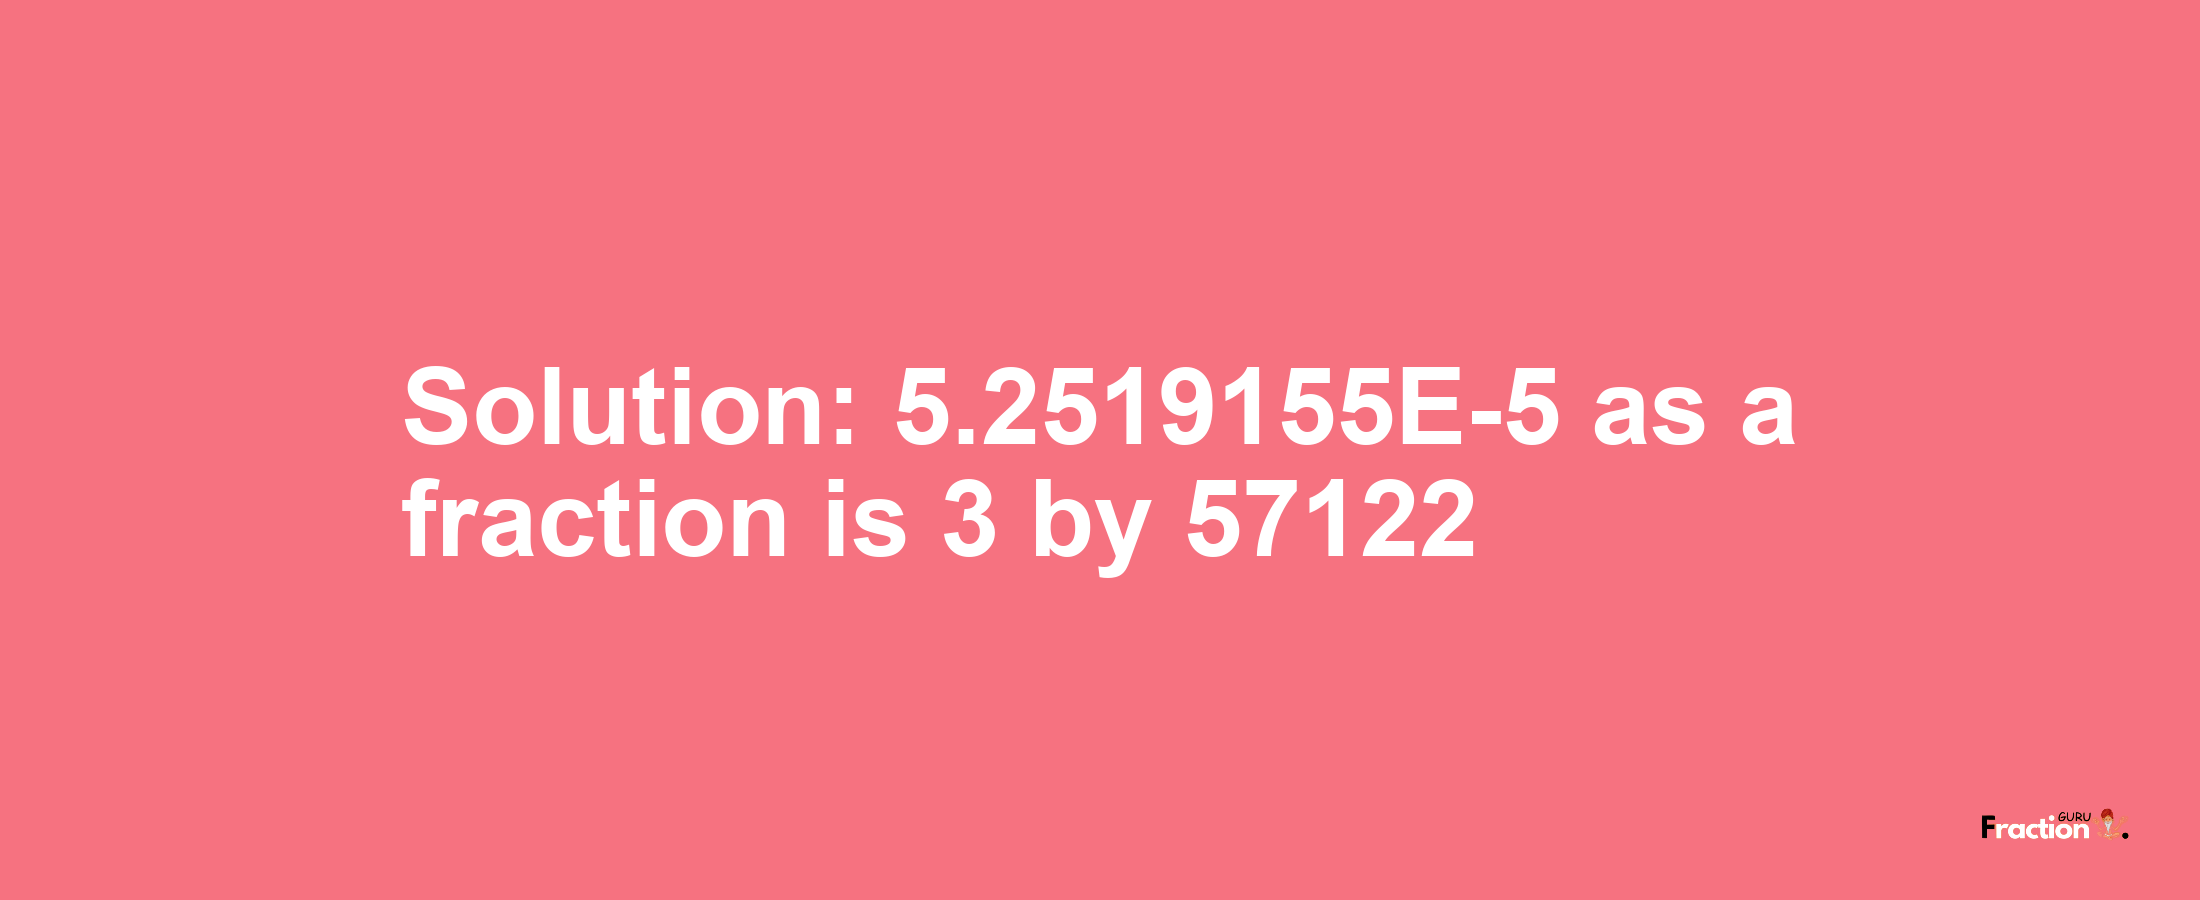 Solution:5.2519155E-5 as a fraction is 3/57122